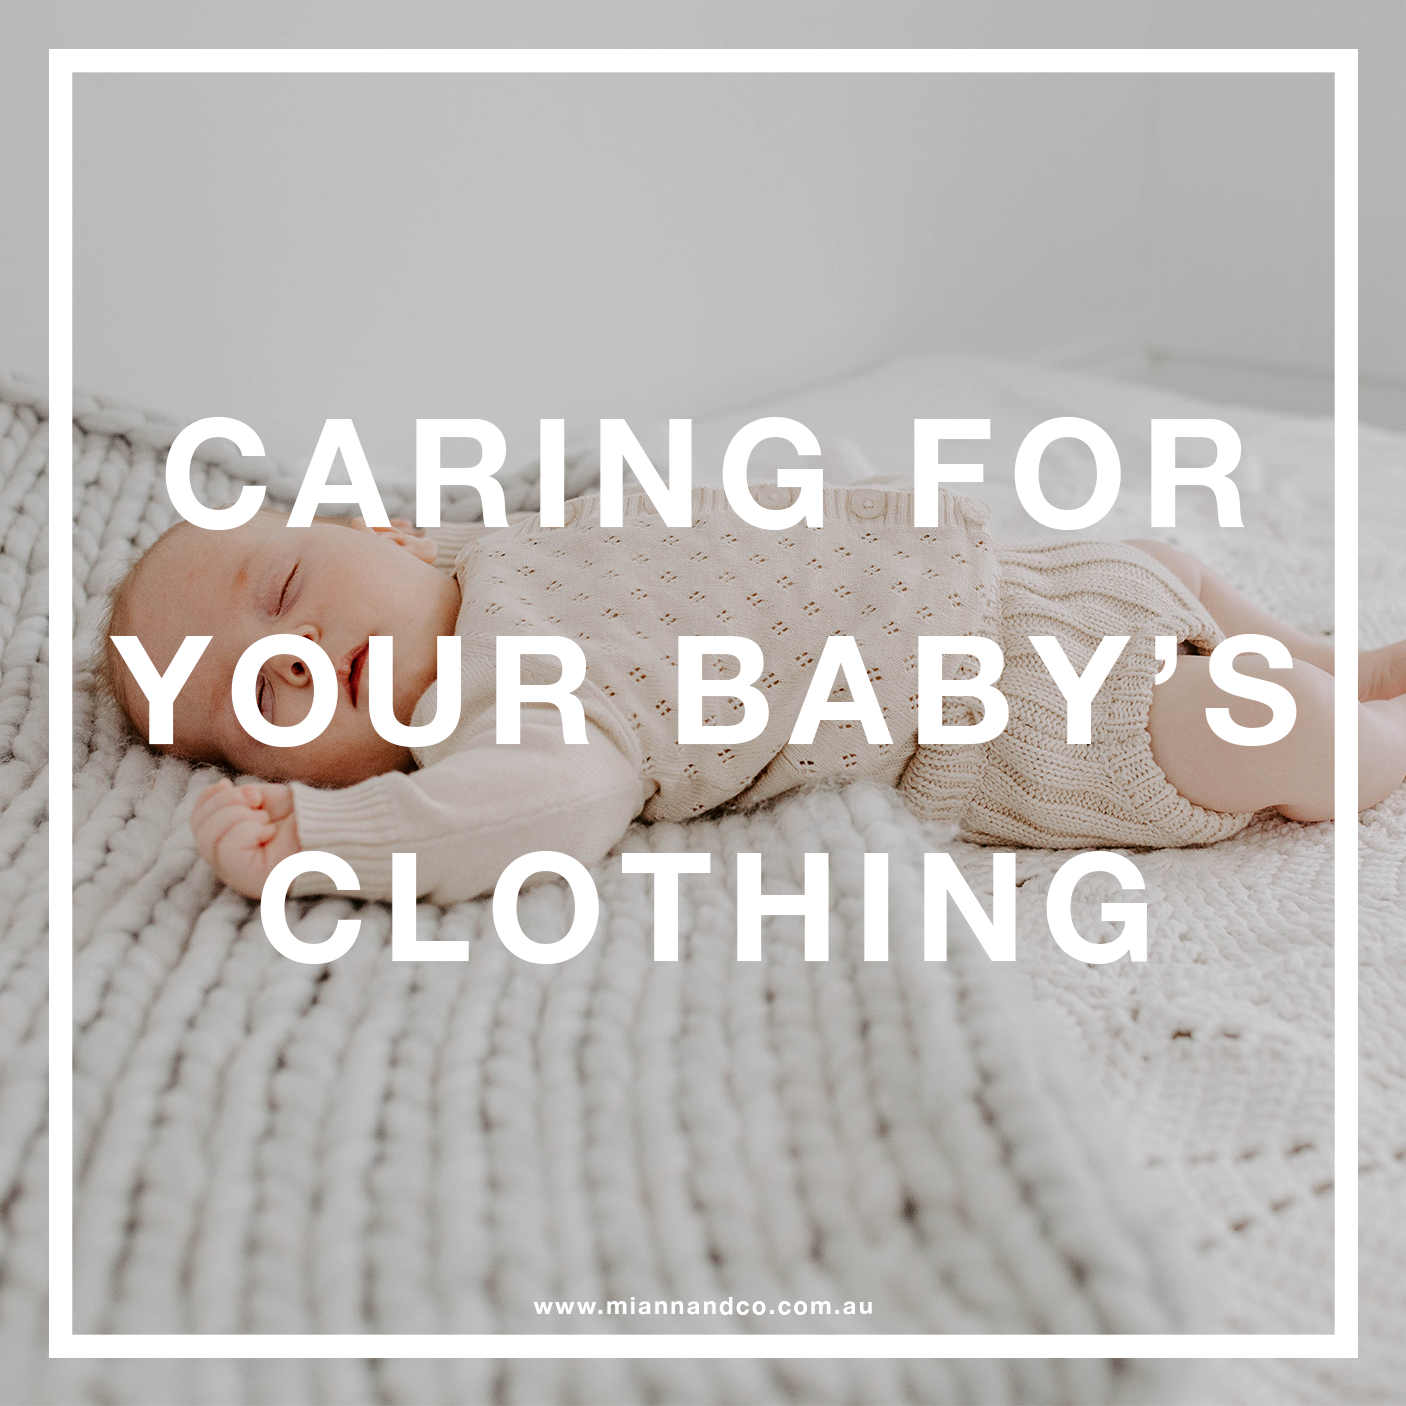 CARING FOR YOUR BABY'S CLOTHING